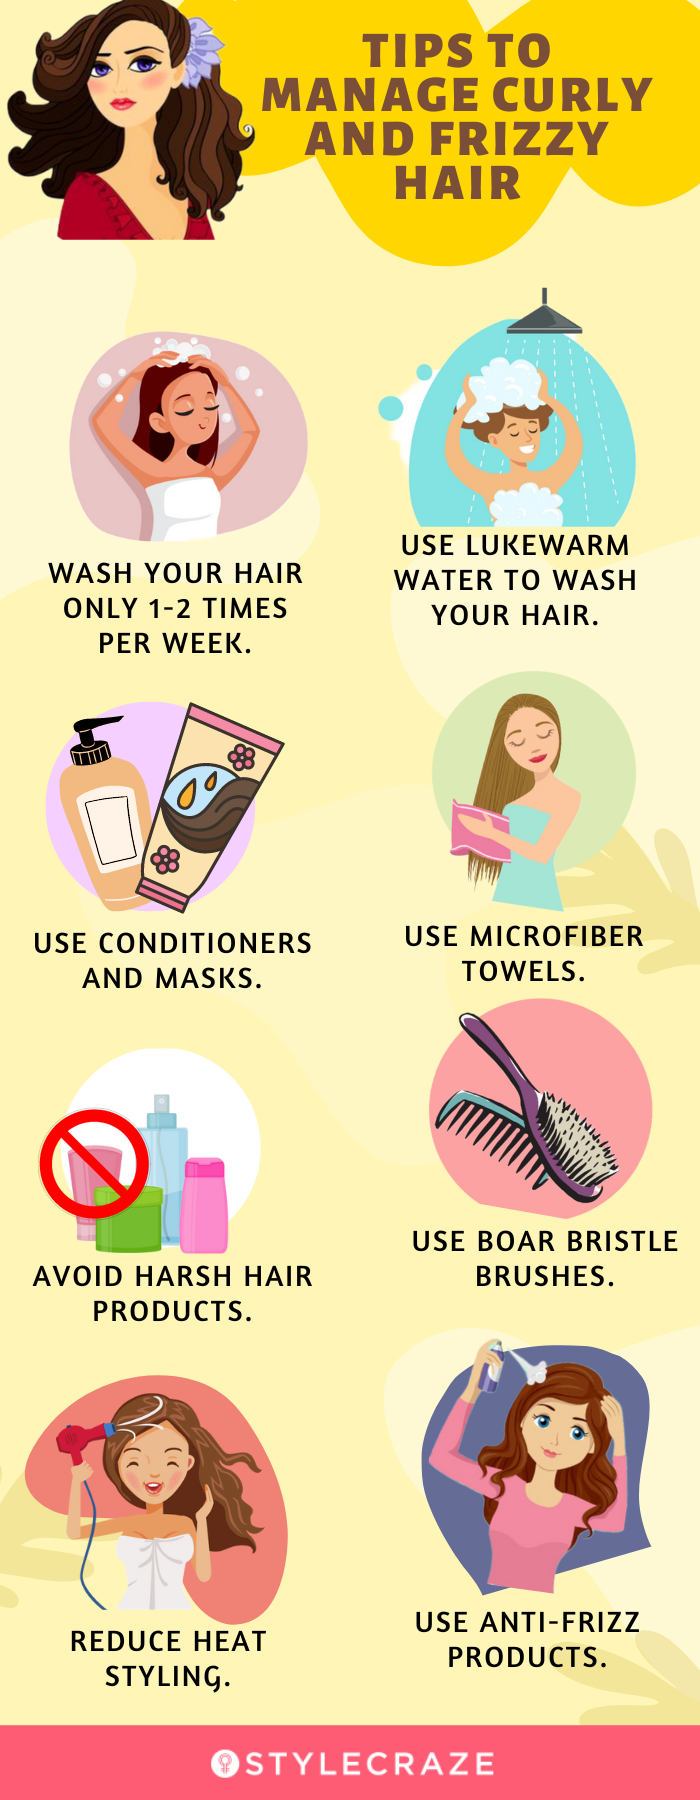 tips to manage curly and frizzy hair [infographic]